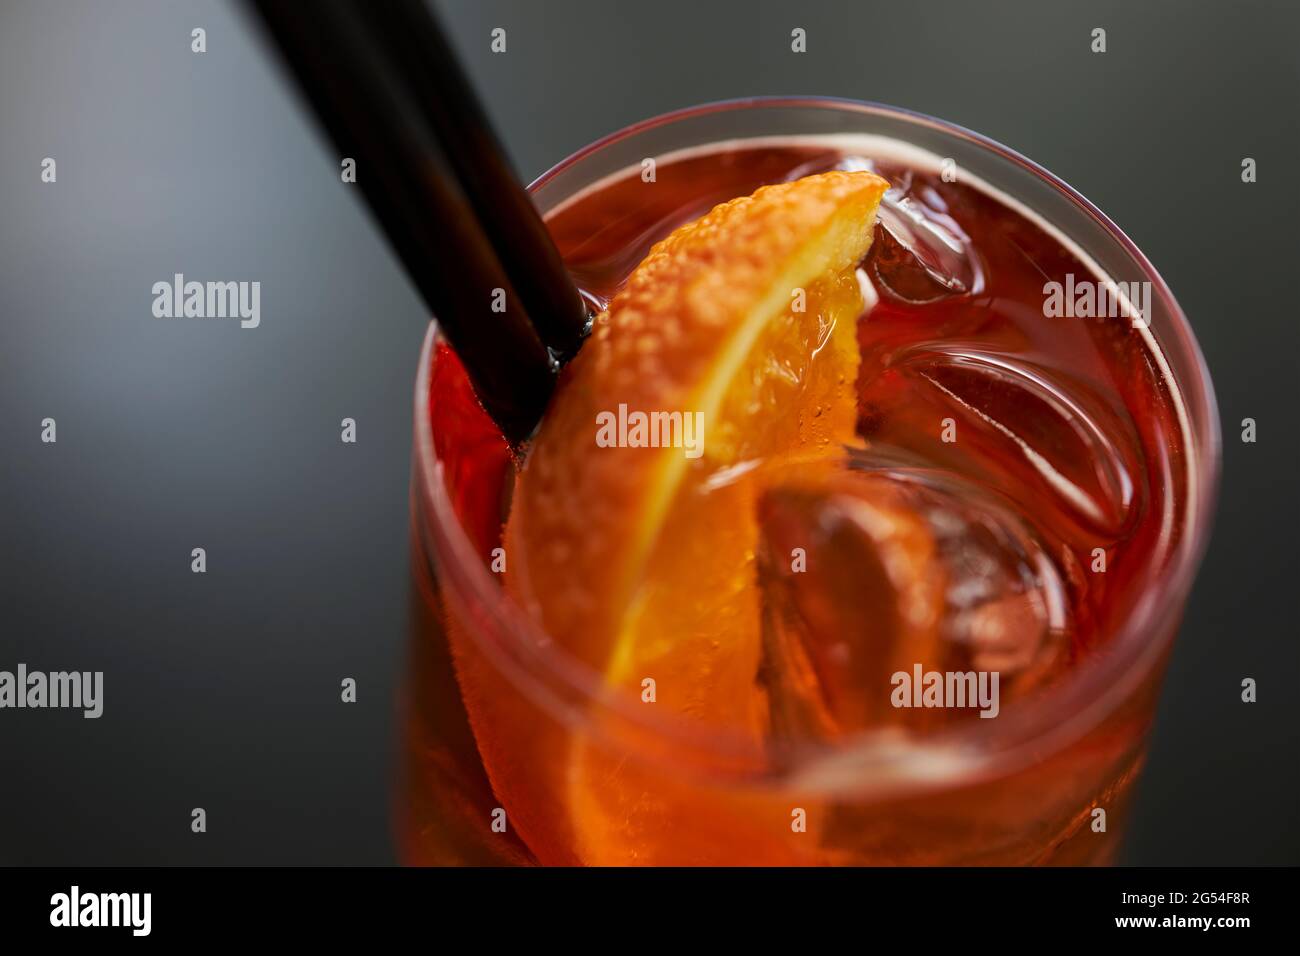 Classy cocktail on a dark background Stock Photo